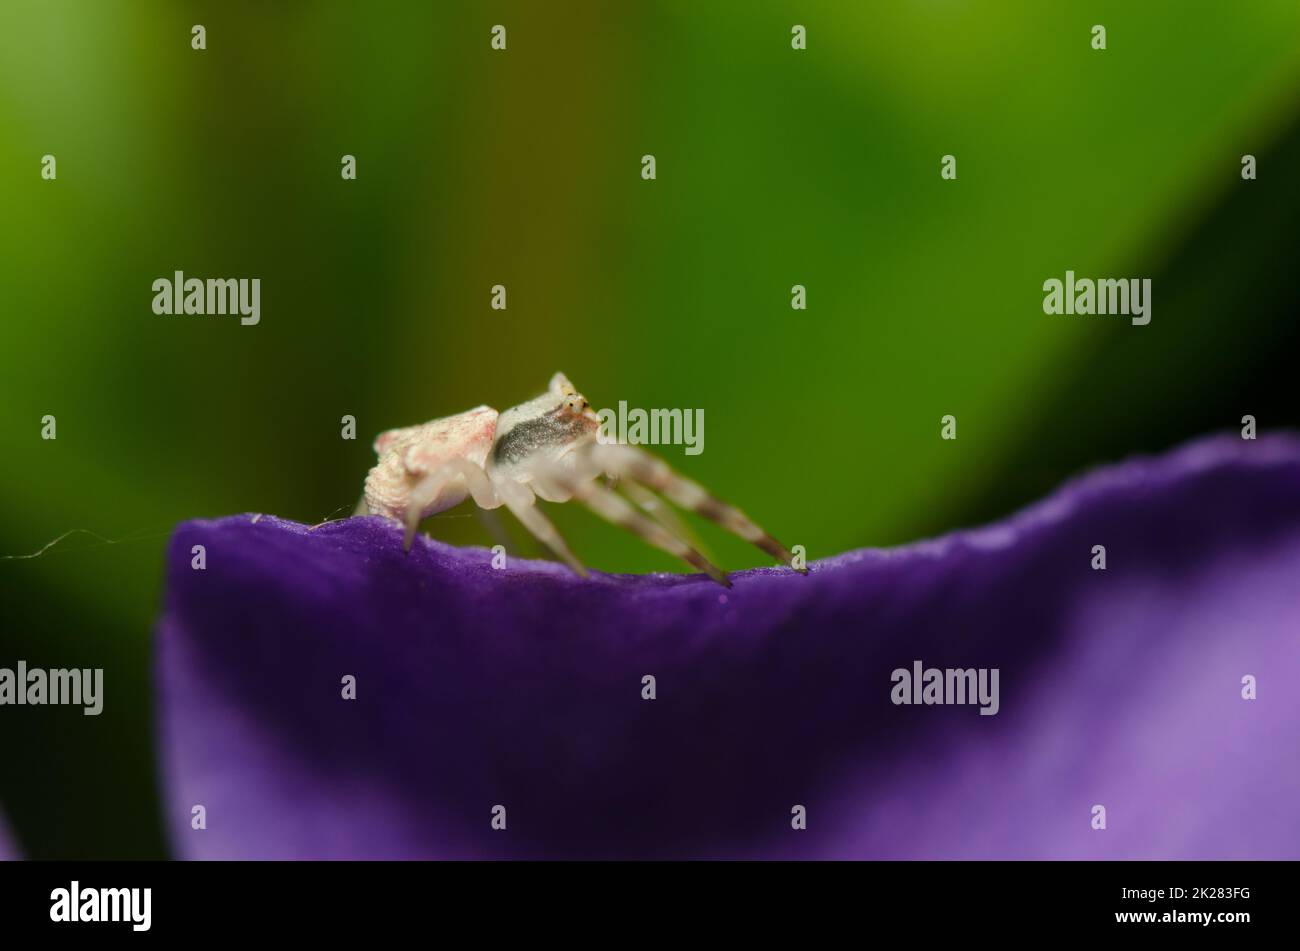 Crab spider on a petal of bigleaf periwinkle. Stock Photo